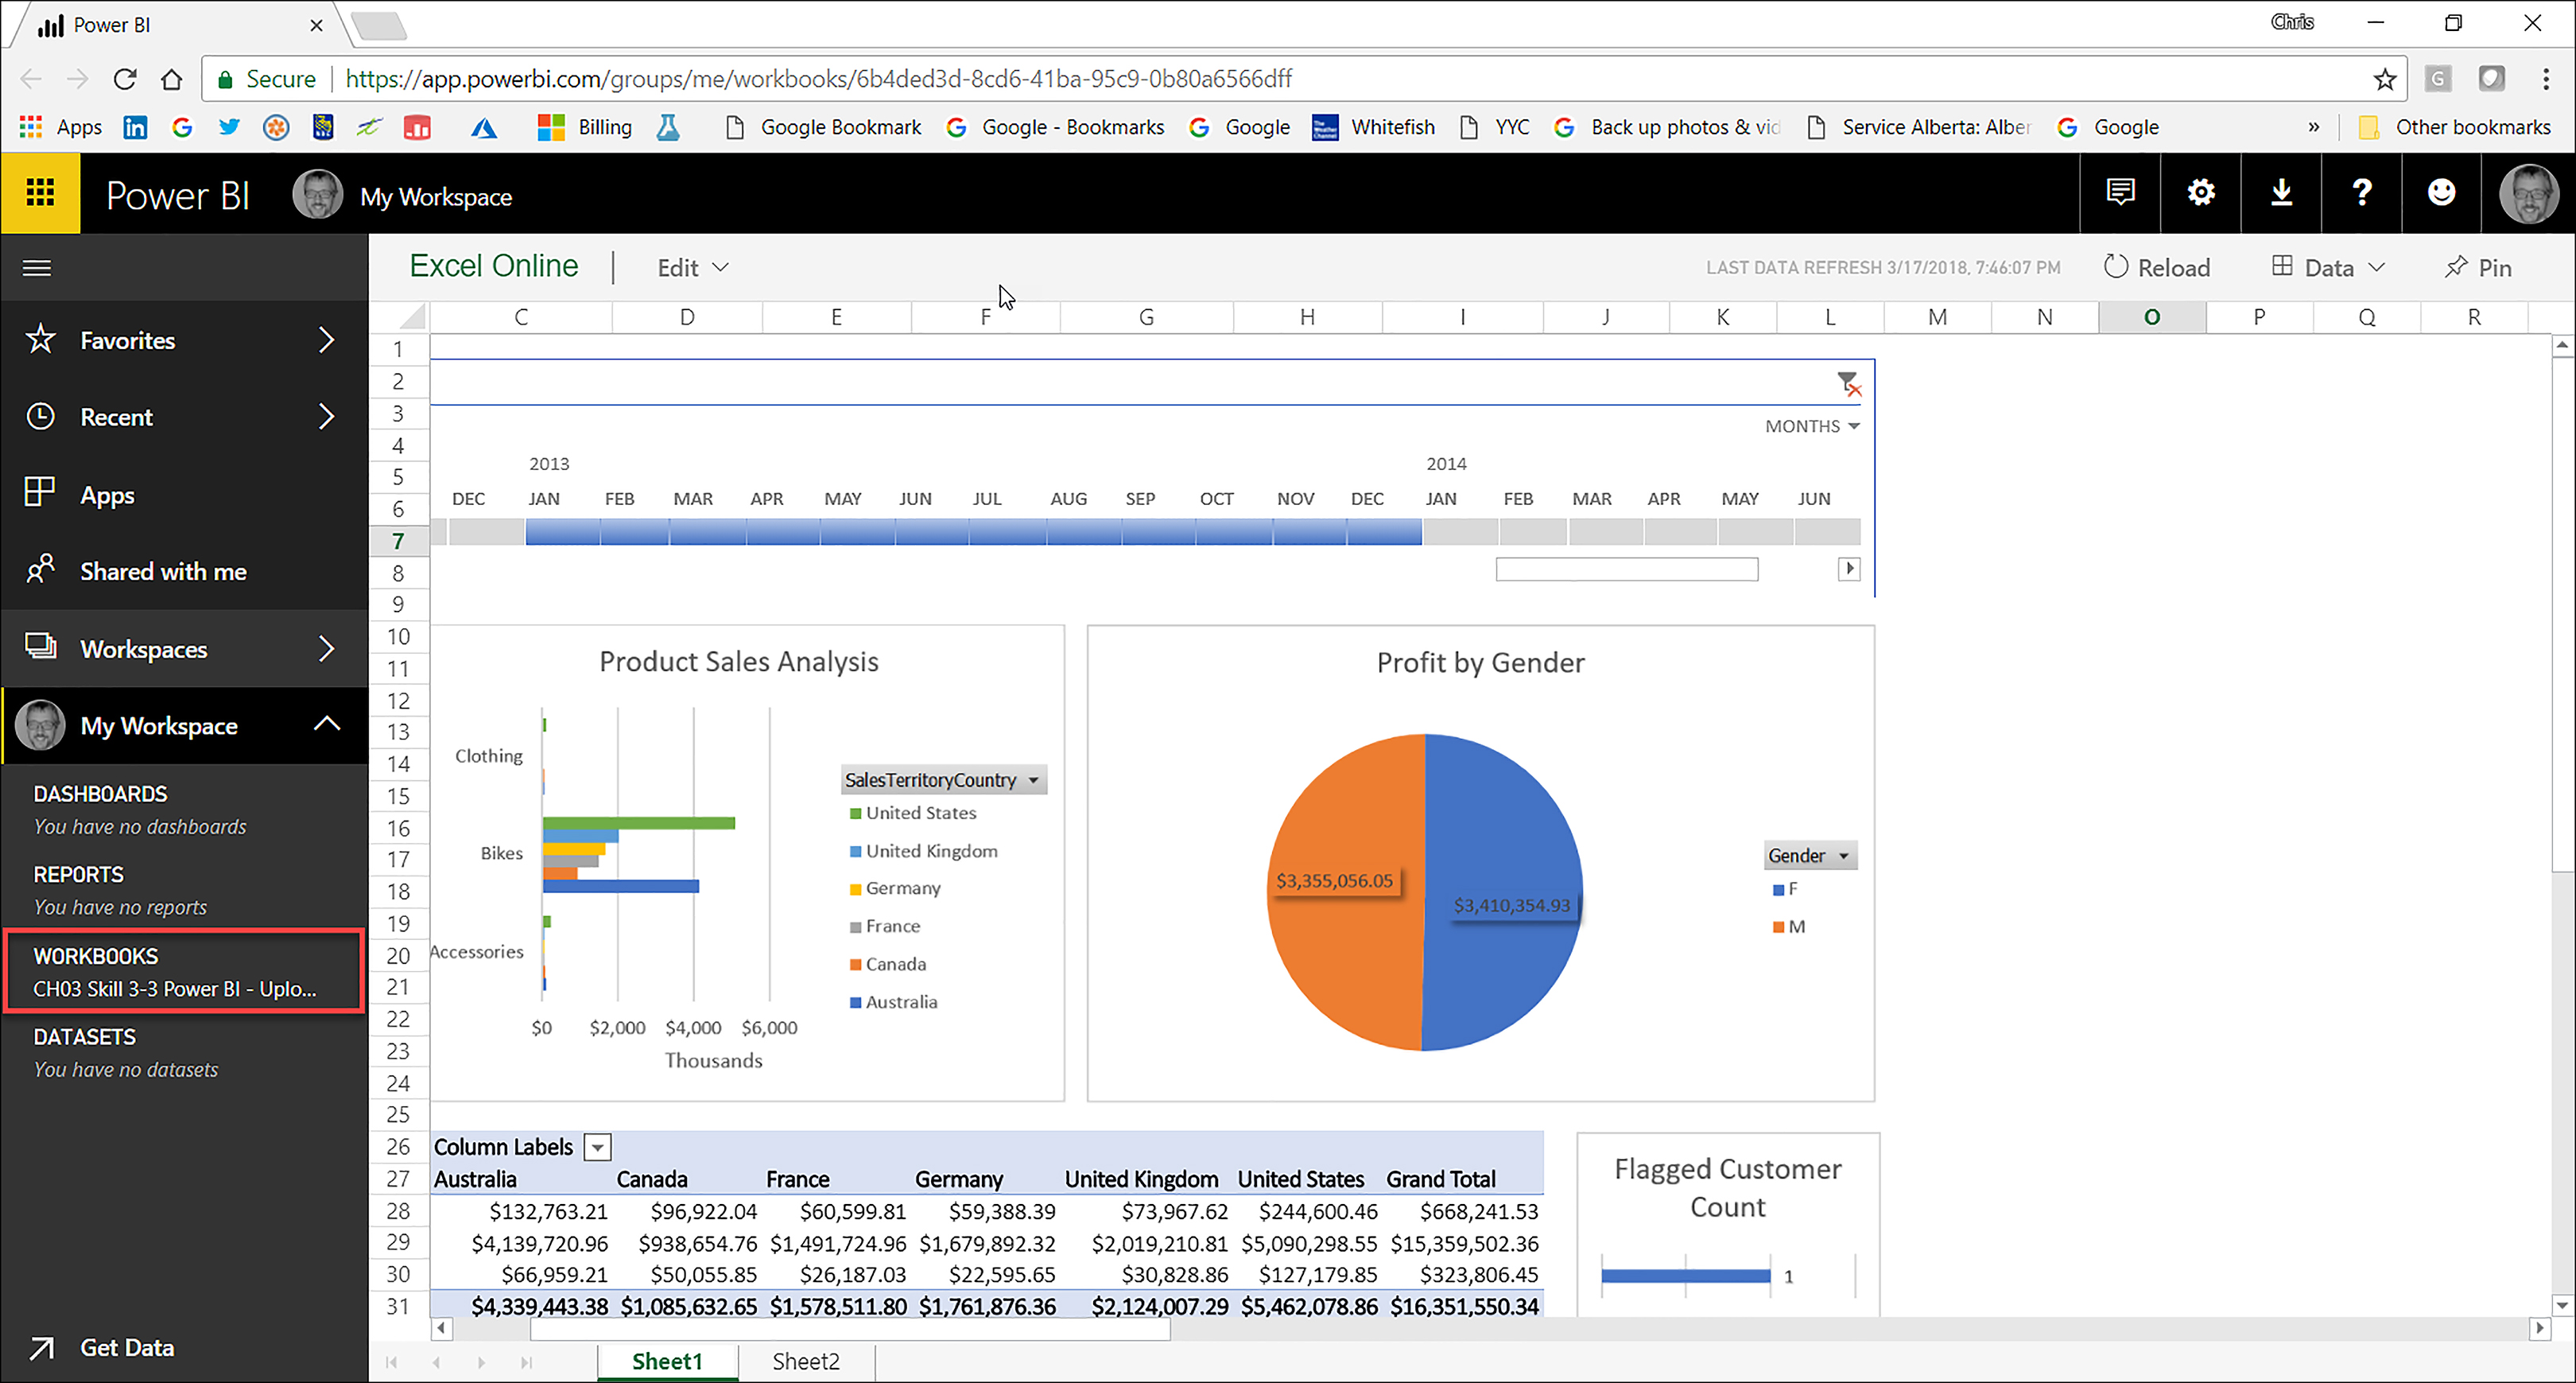 Excel workbook content hosted in the Power BI Service.